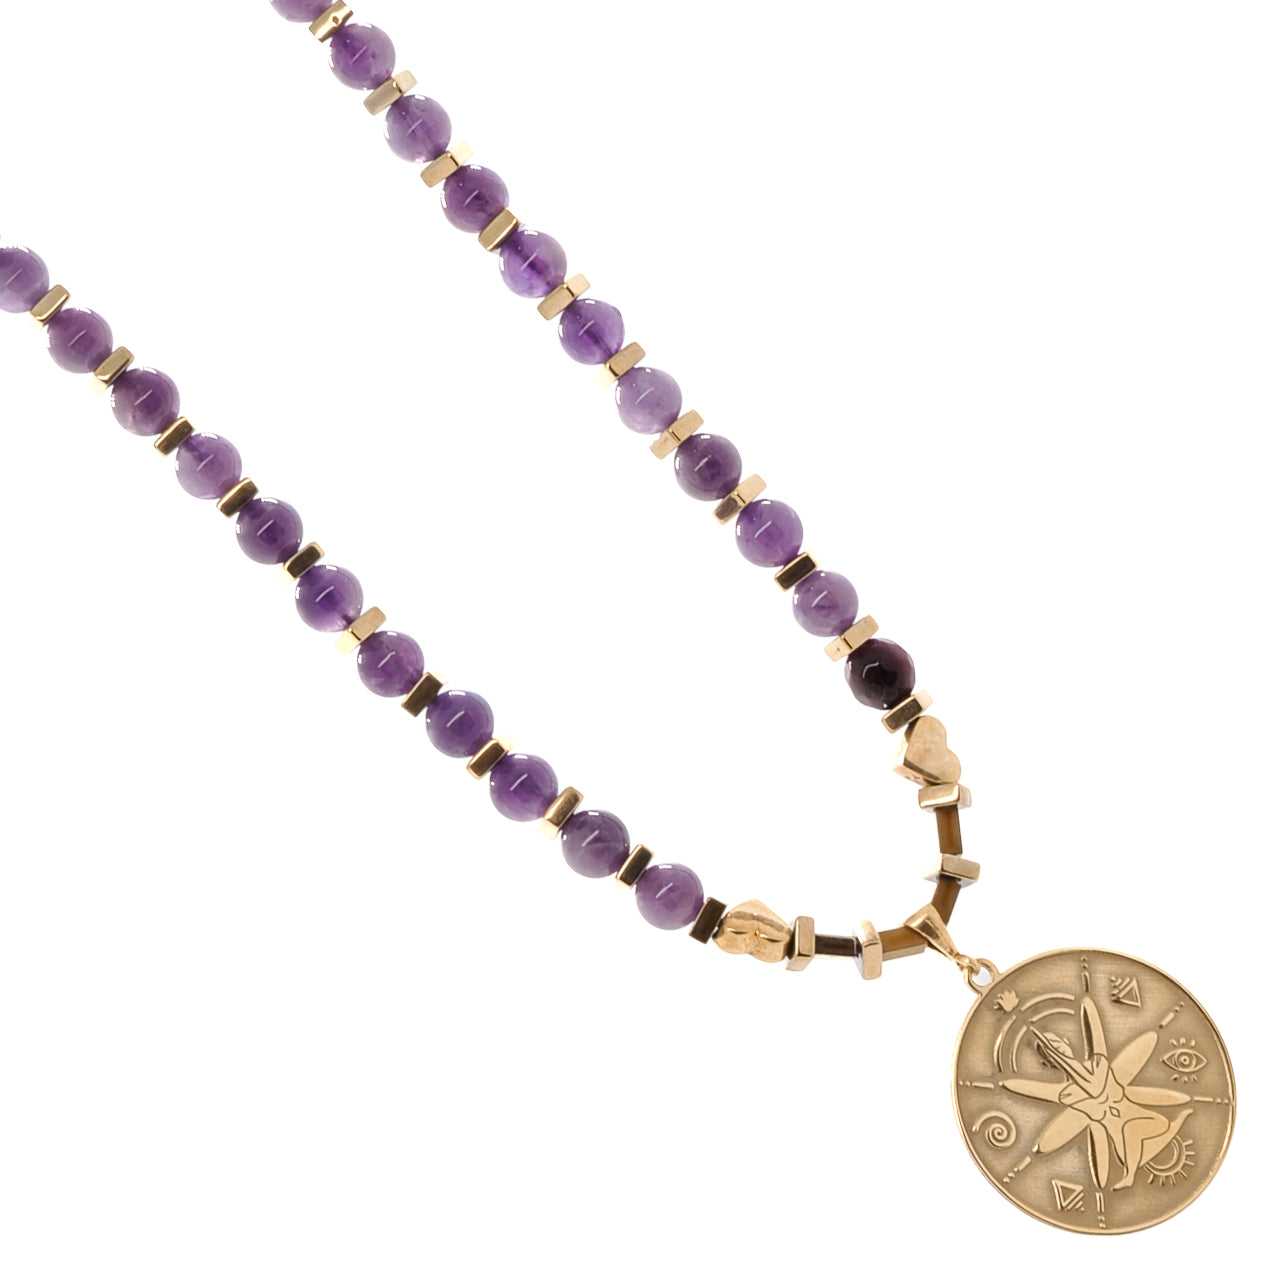 Meaningful and Unique - The See The Good Amethyst Choker Necklace Shines Brightly.